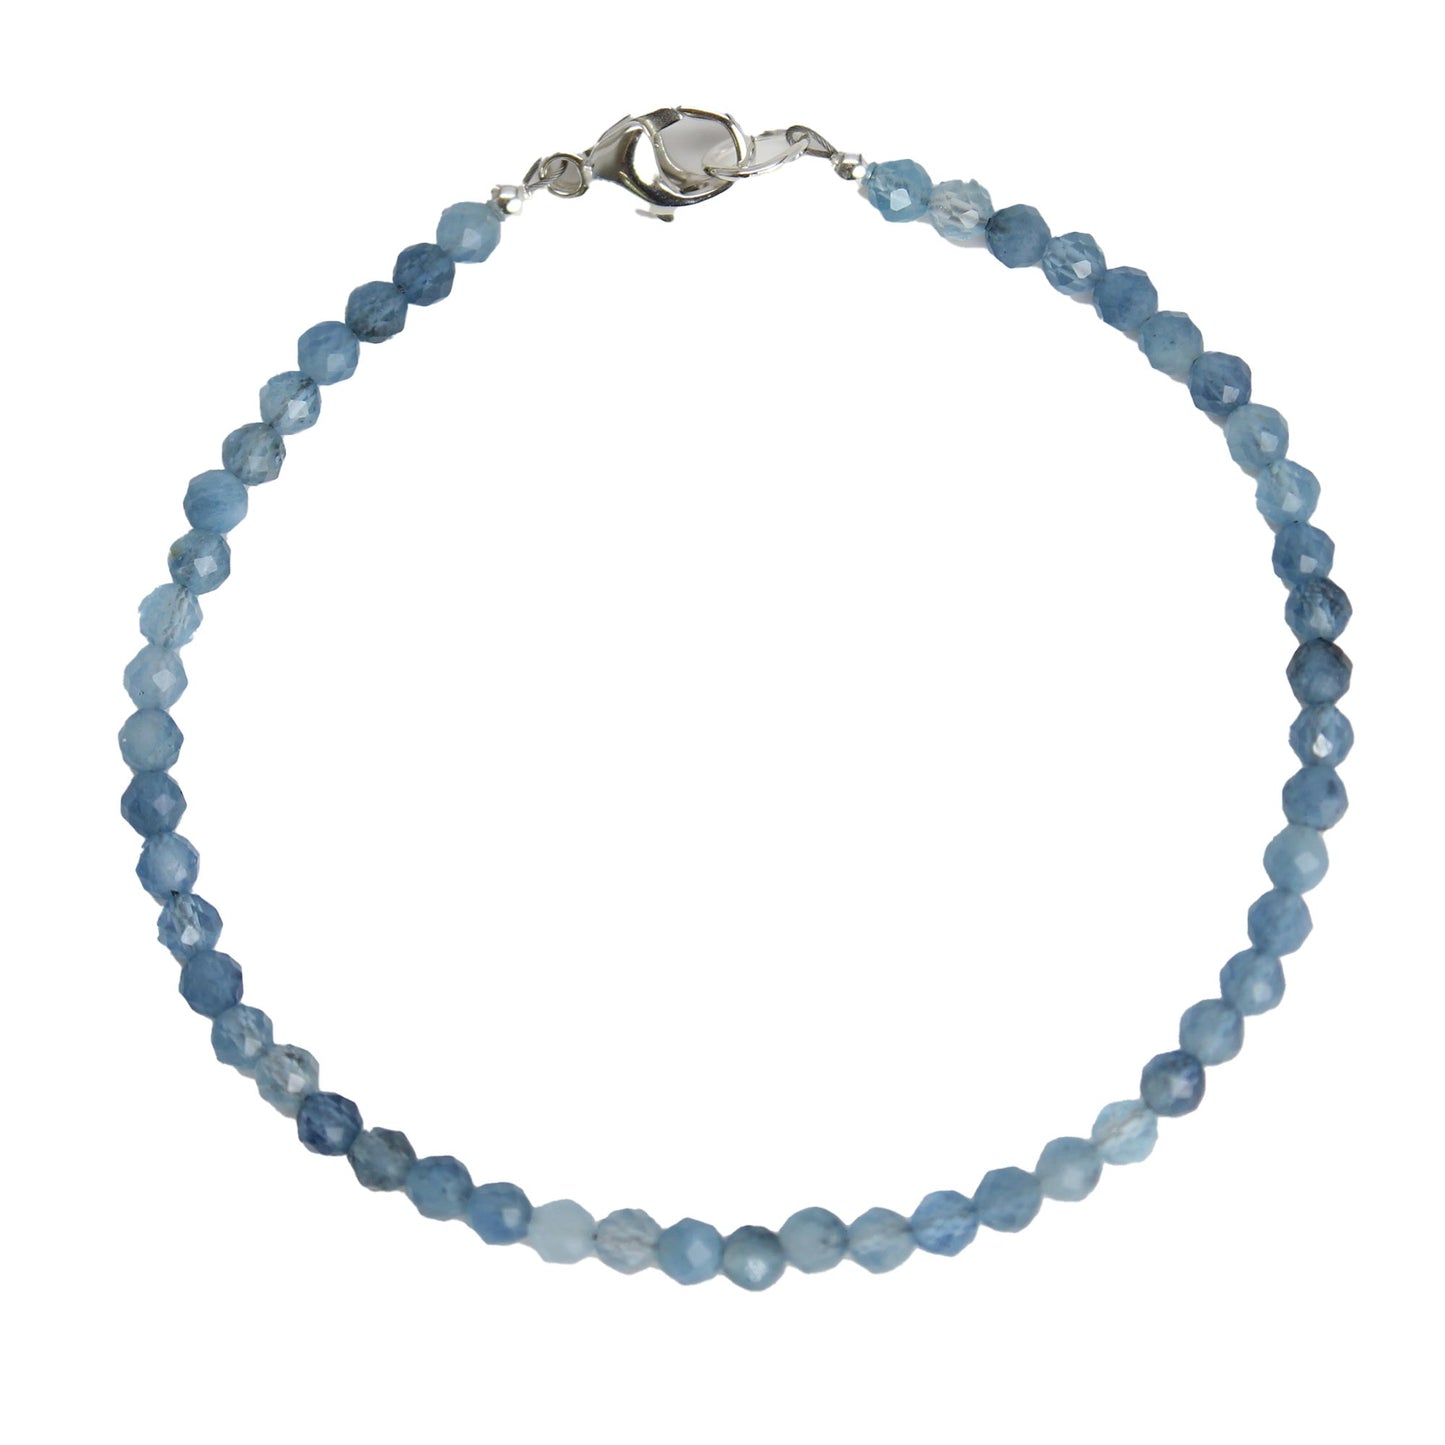 Blue Beaded Bracelet with Sterling Silver Shells